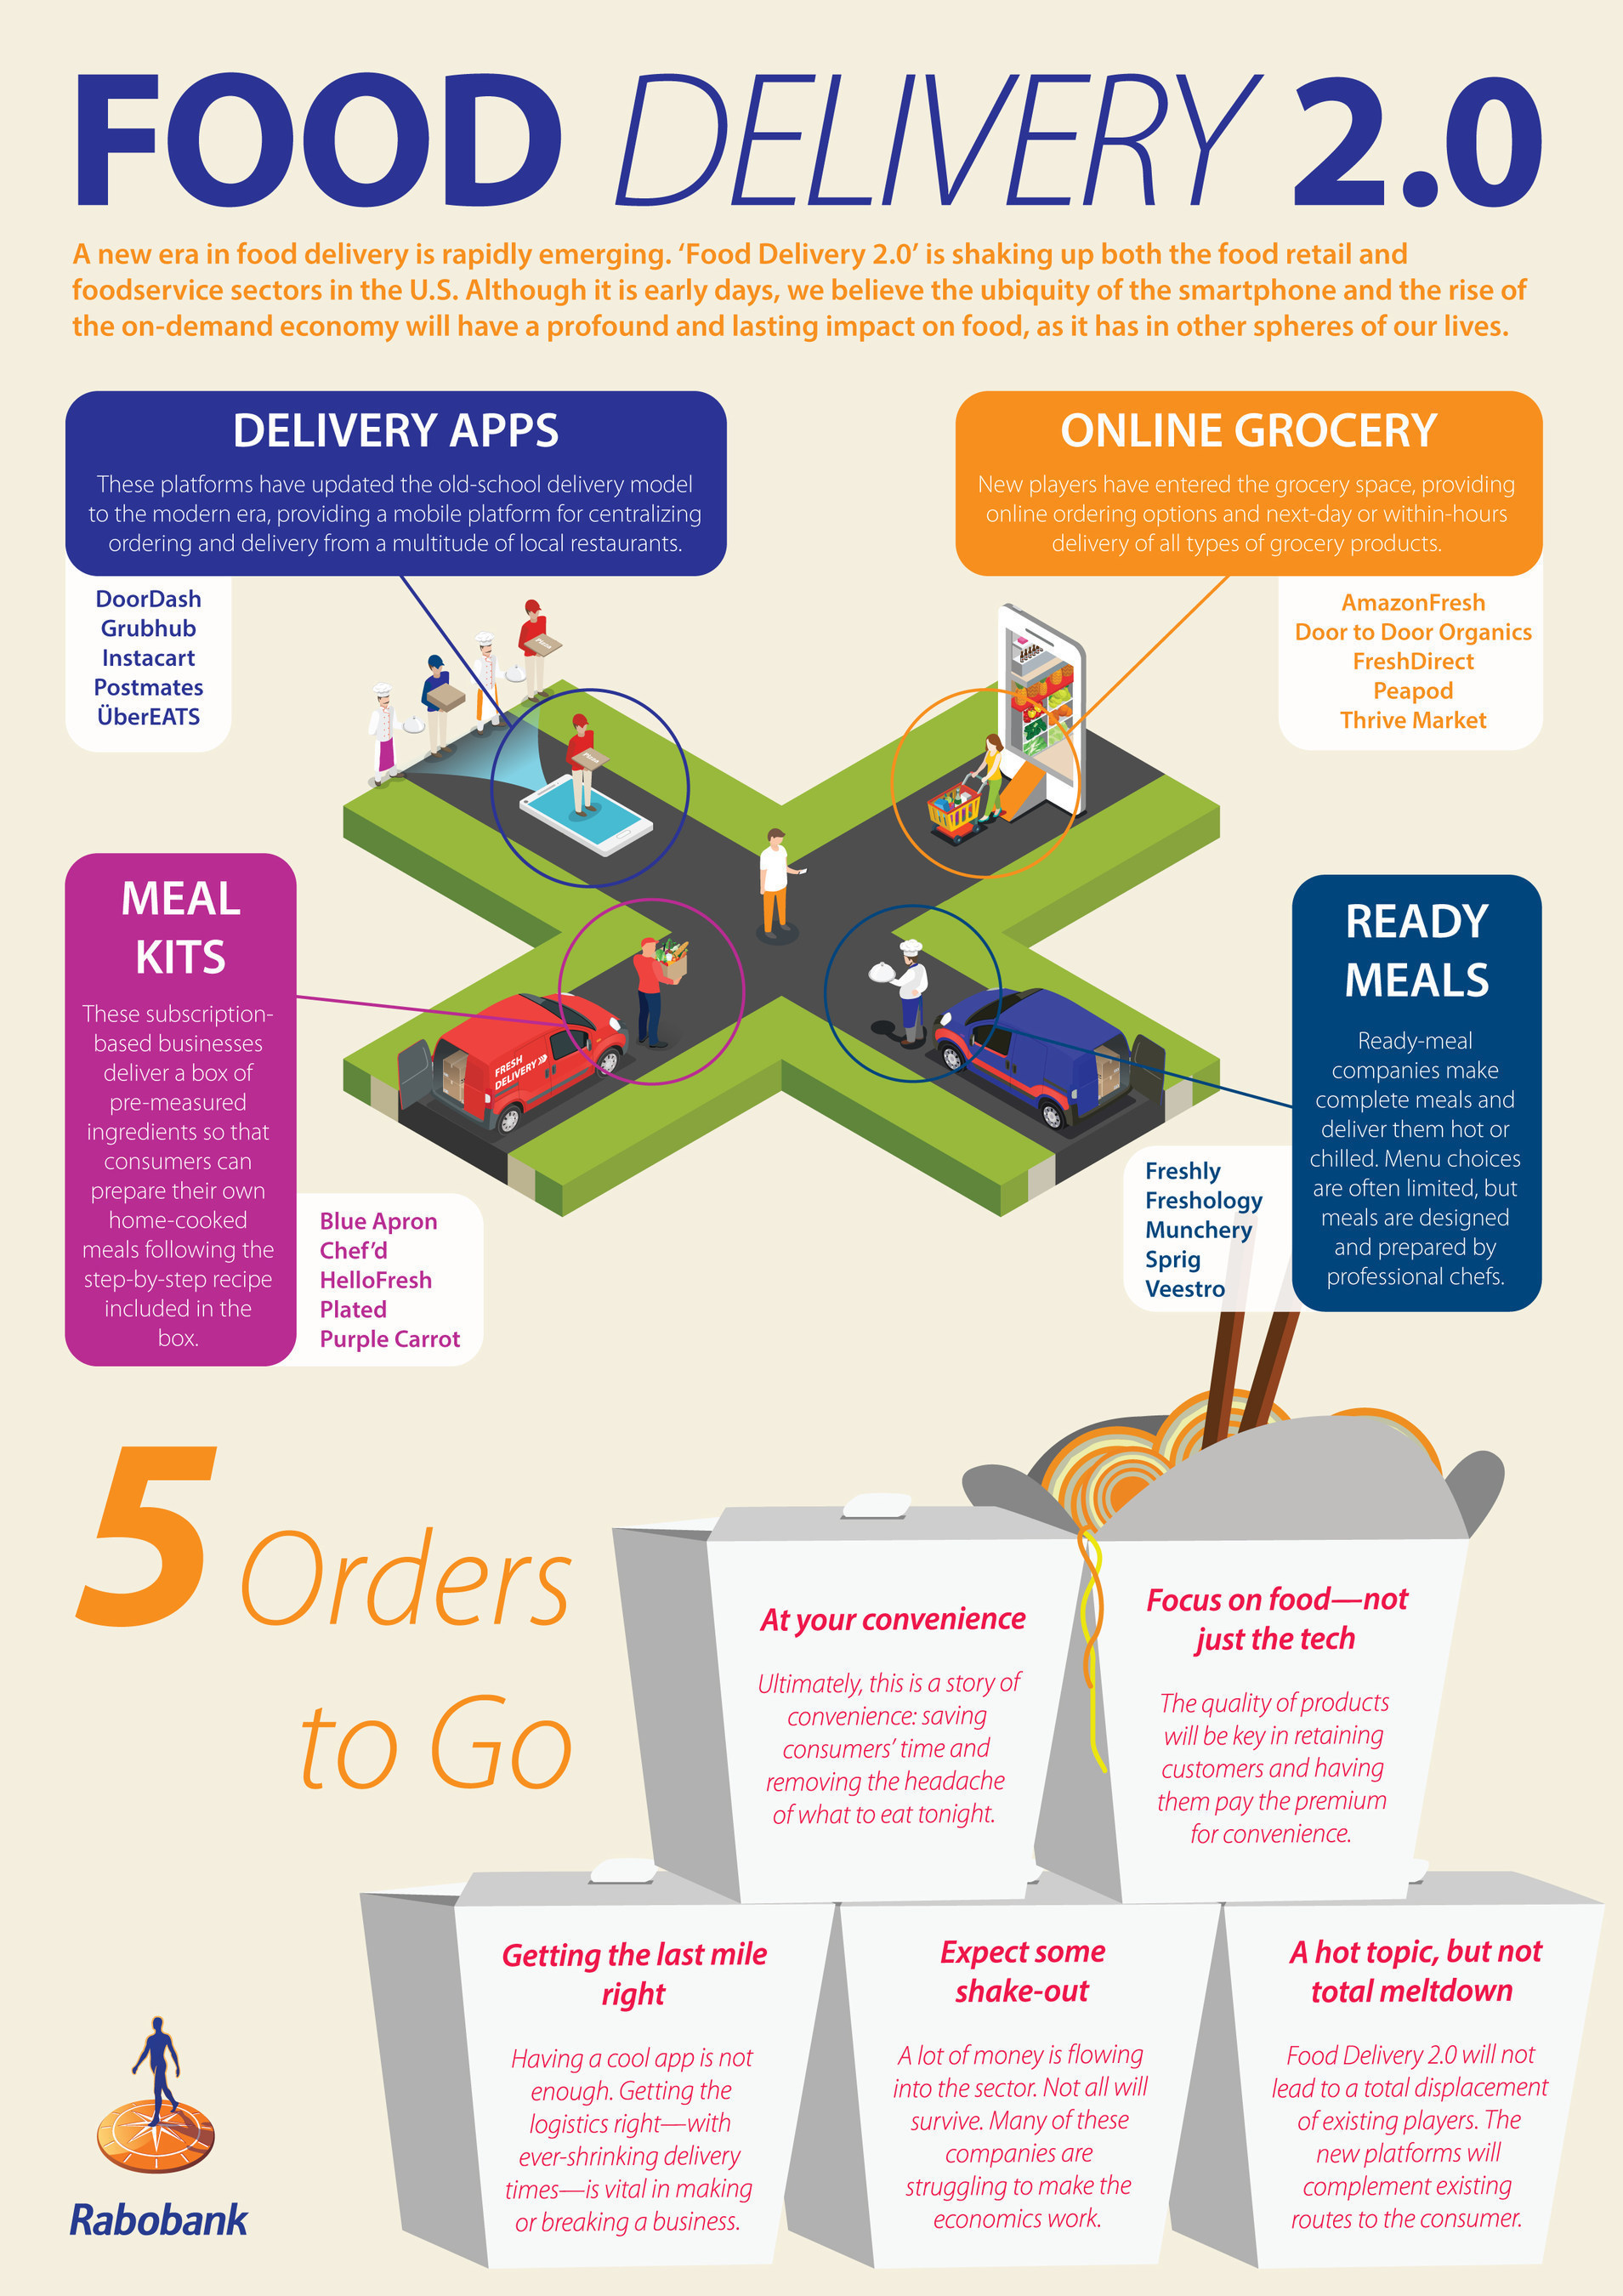 'Food Delivery 2.0' is shaking up the U.S. food retail and foodservice sectors